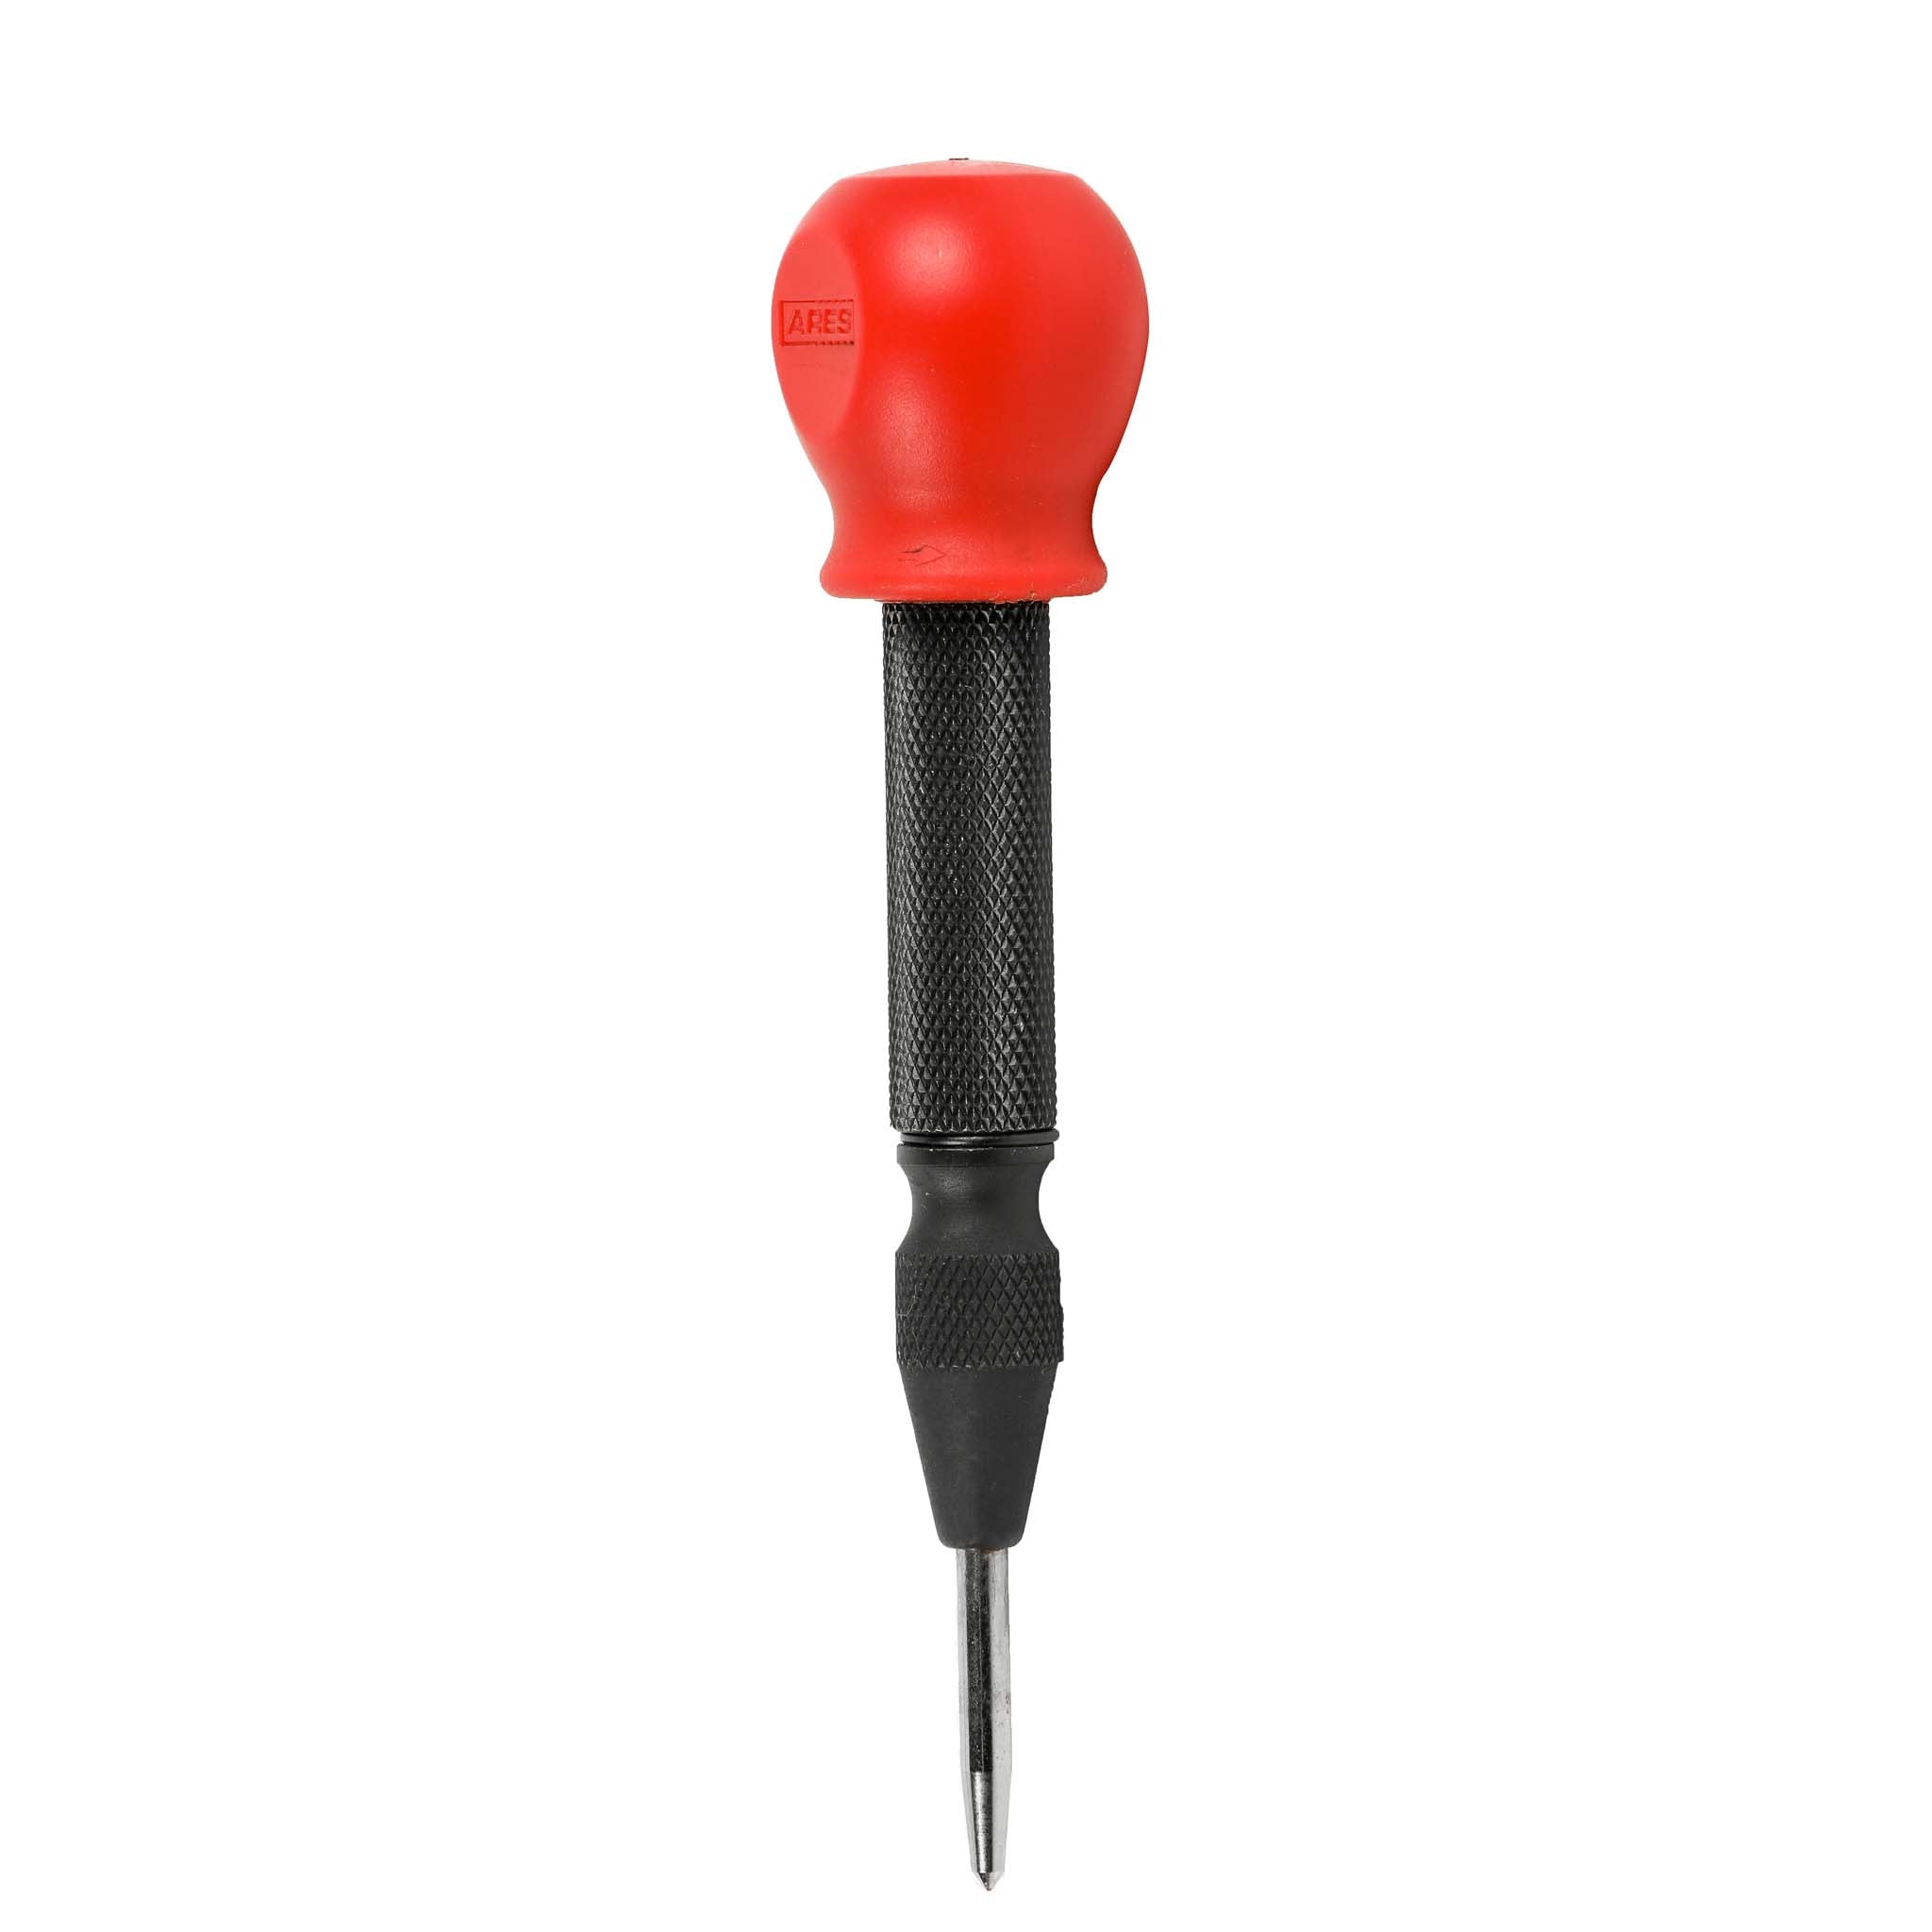 PROFESSIONAL AUTOMATIC CENTER PUNCH from Aircraft Tool Supply